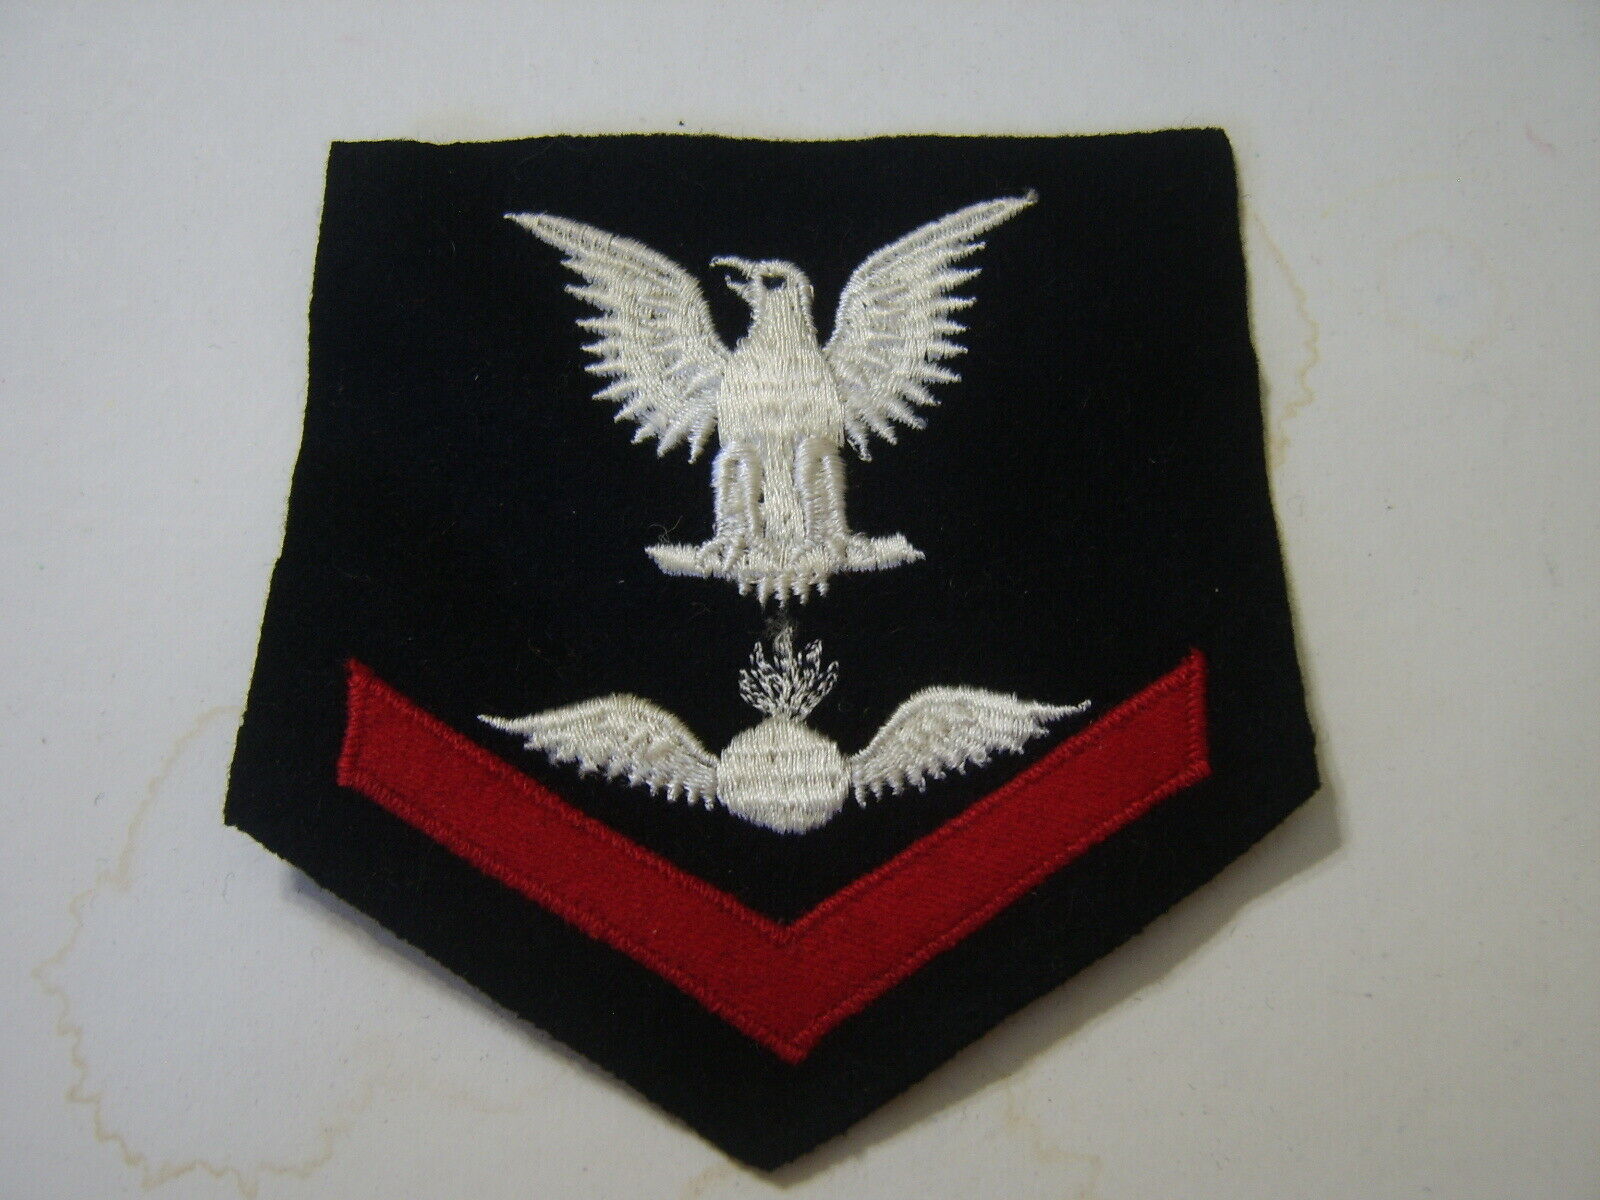 Primary image for AVIATION ORDNANCEMAN THIRD CLASS RATING BADGE - E4 WOOL  WW2  DTD 1943:KY20-2